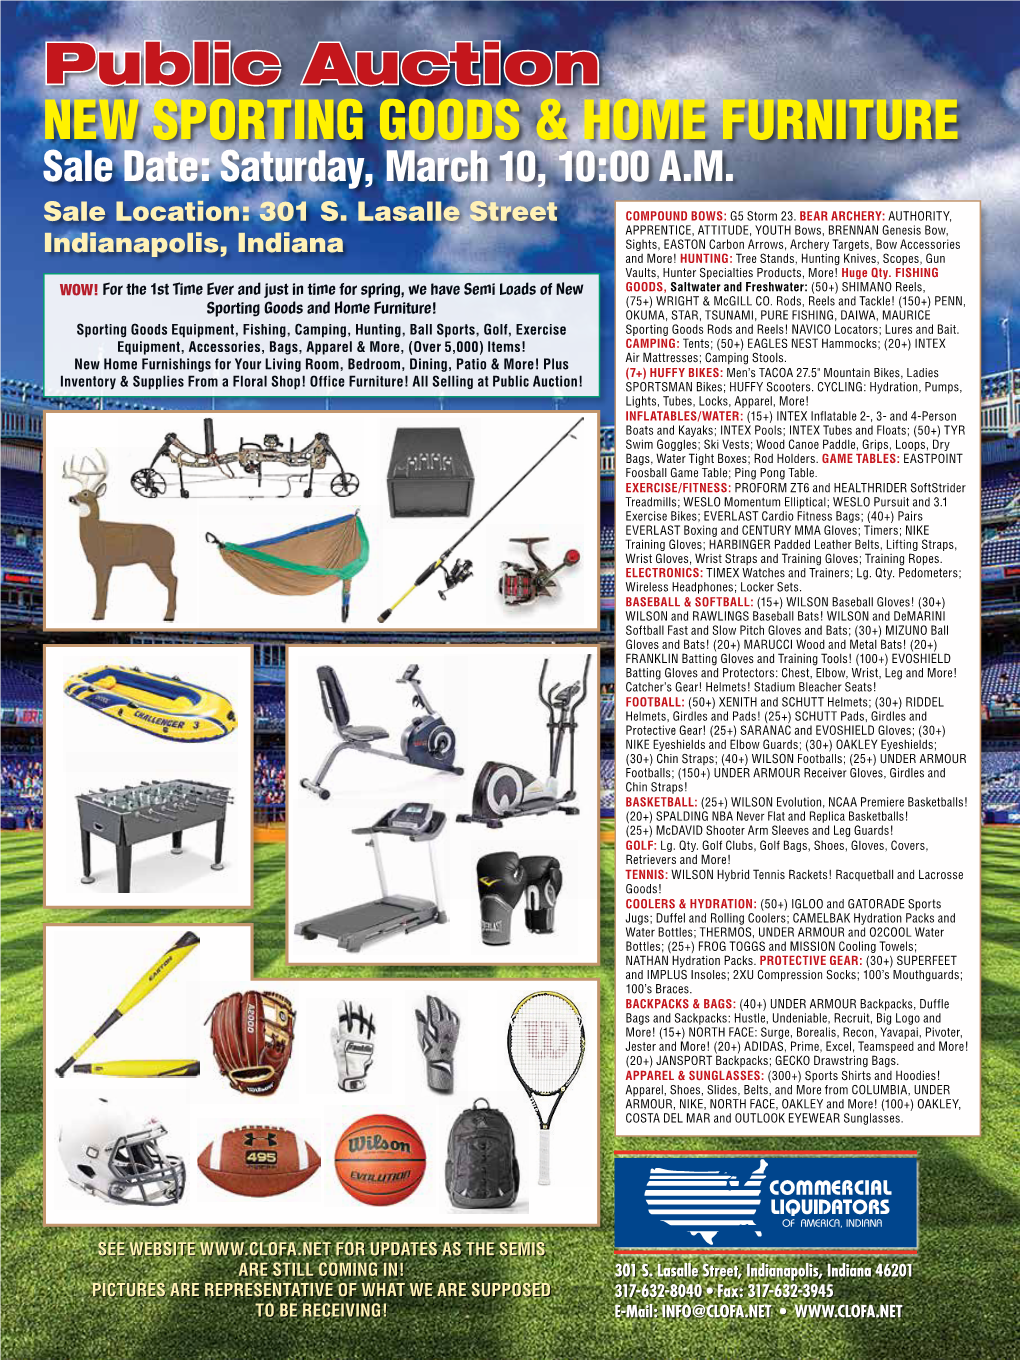 Public Auction NEW SPORTING GOODS & HOME FURNITURE Sale Date: Saturday, March 10, 10:00 A.M